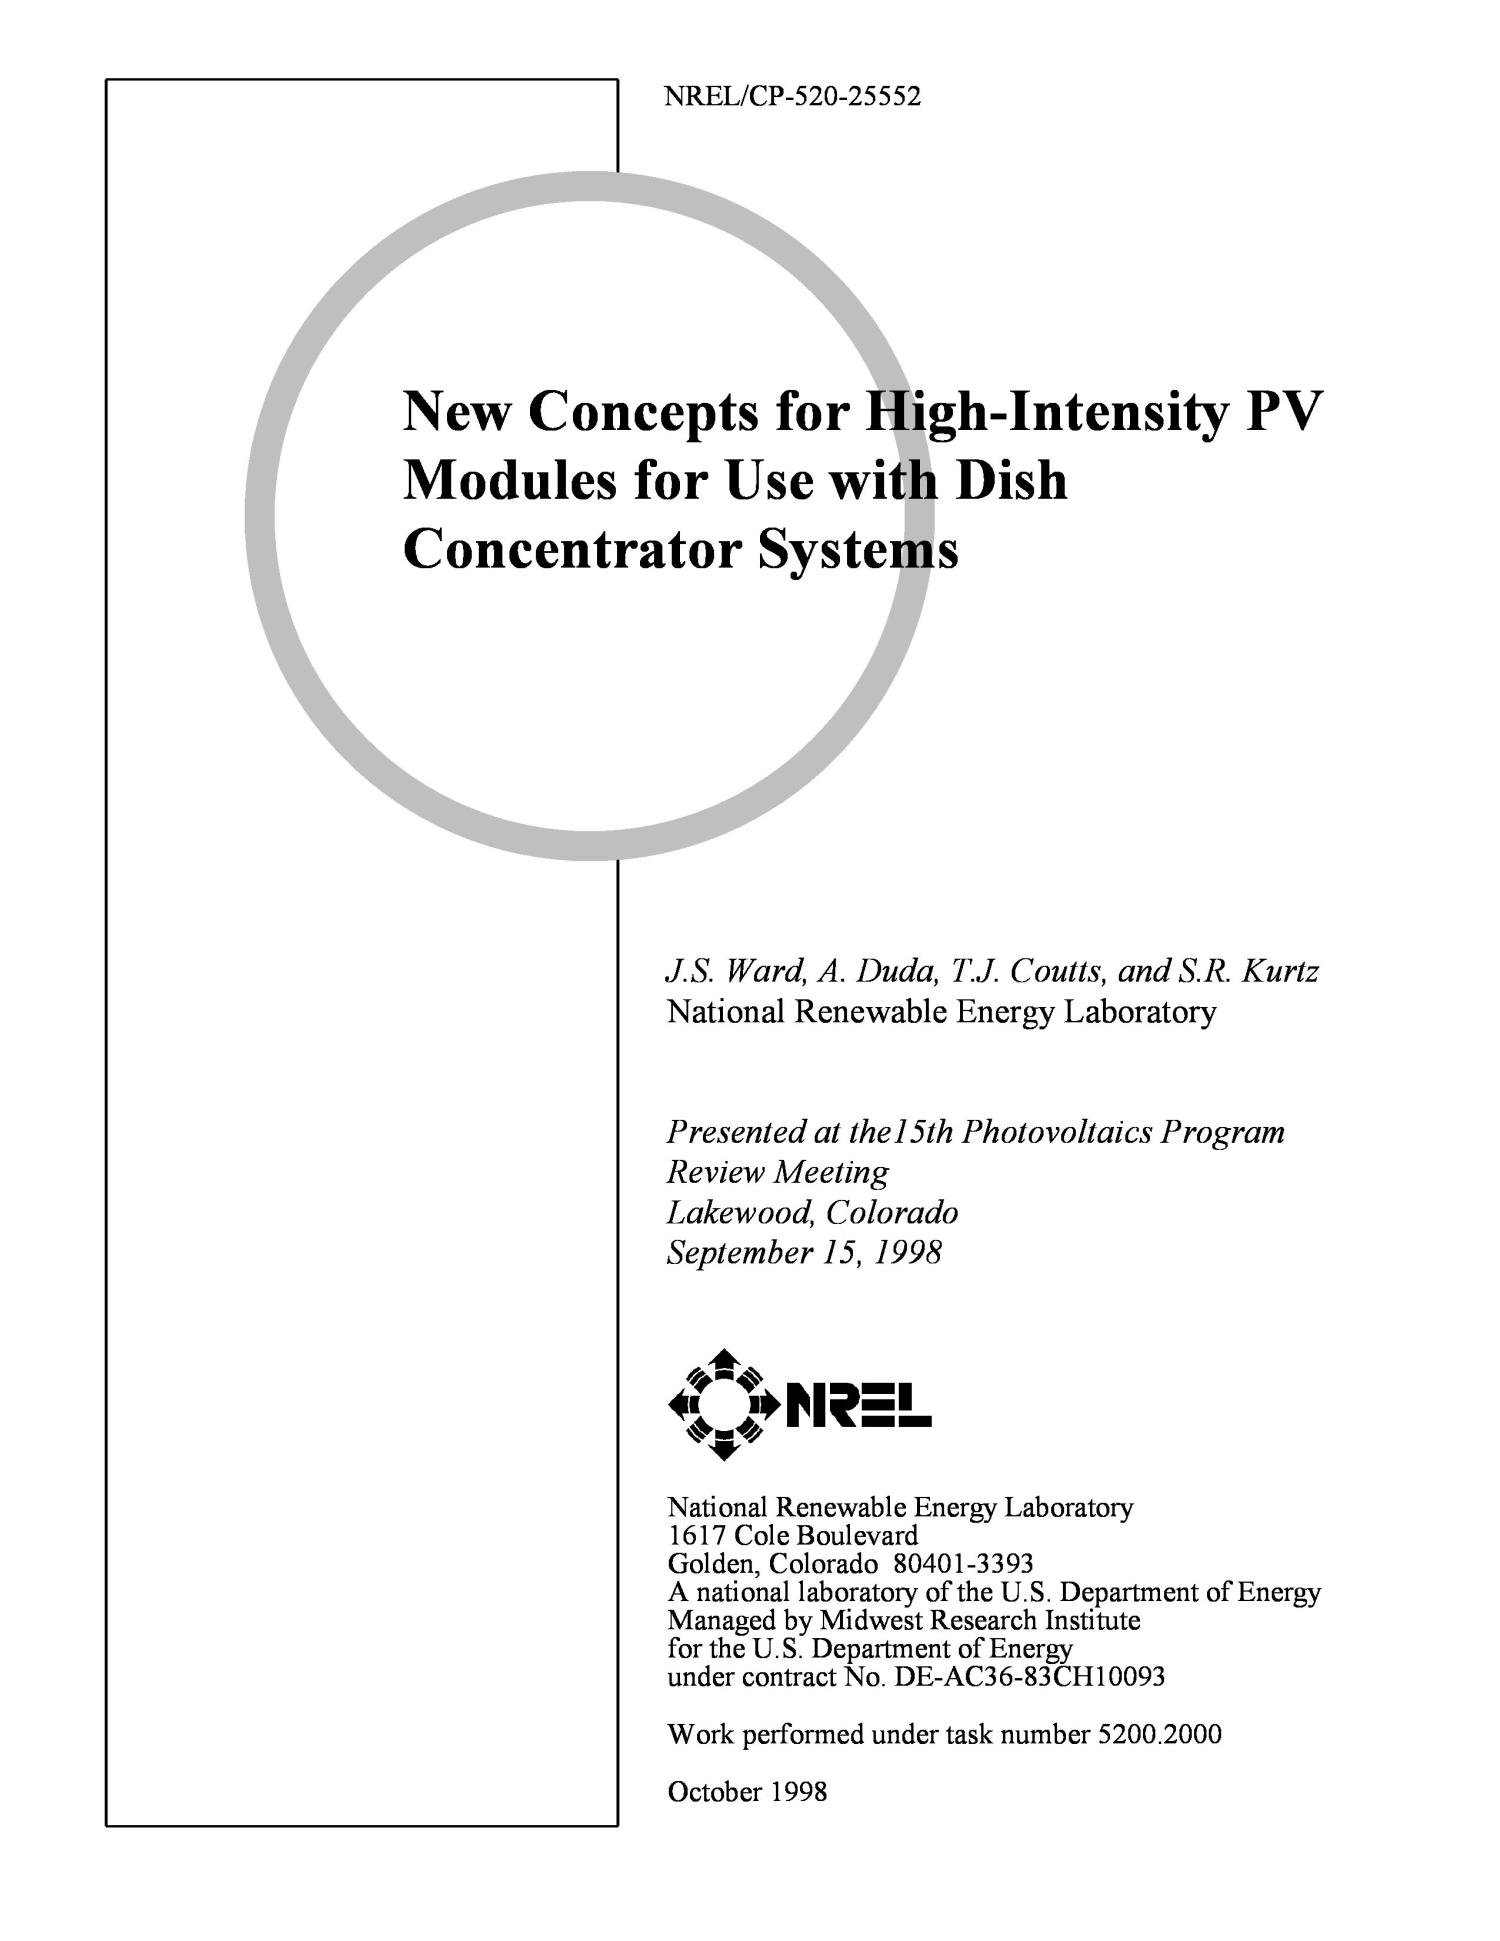 New Concepts for High-Intensity PV Modules for Use with Dish Concentrator Systems
                                                
                                                    [Sequence #]: 1 of 10
                                                